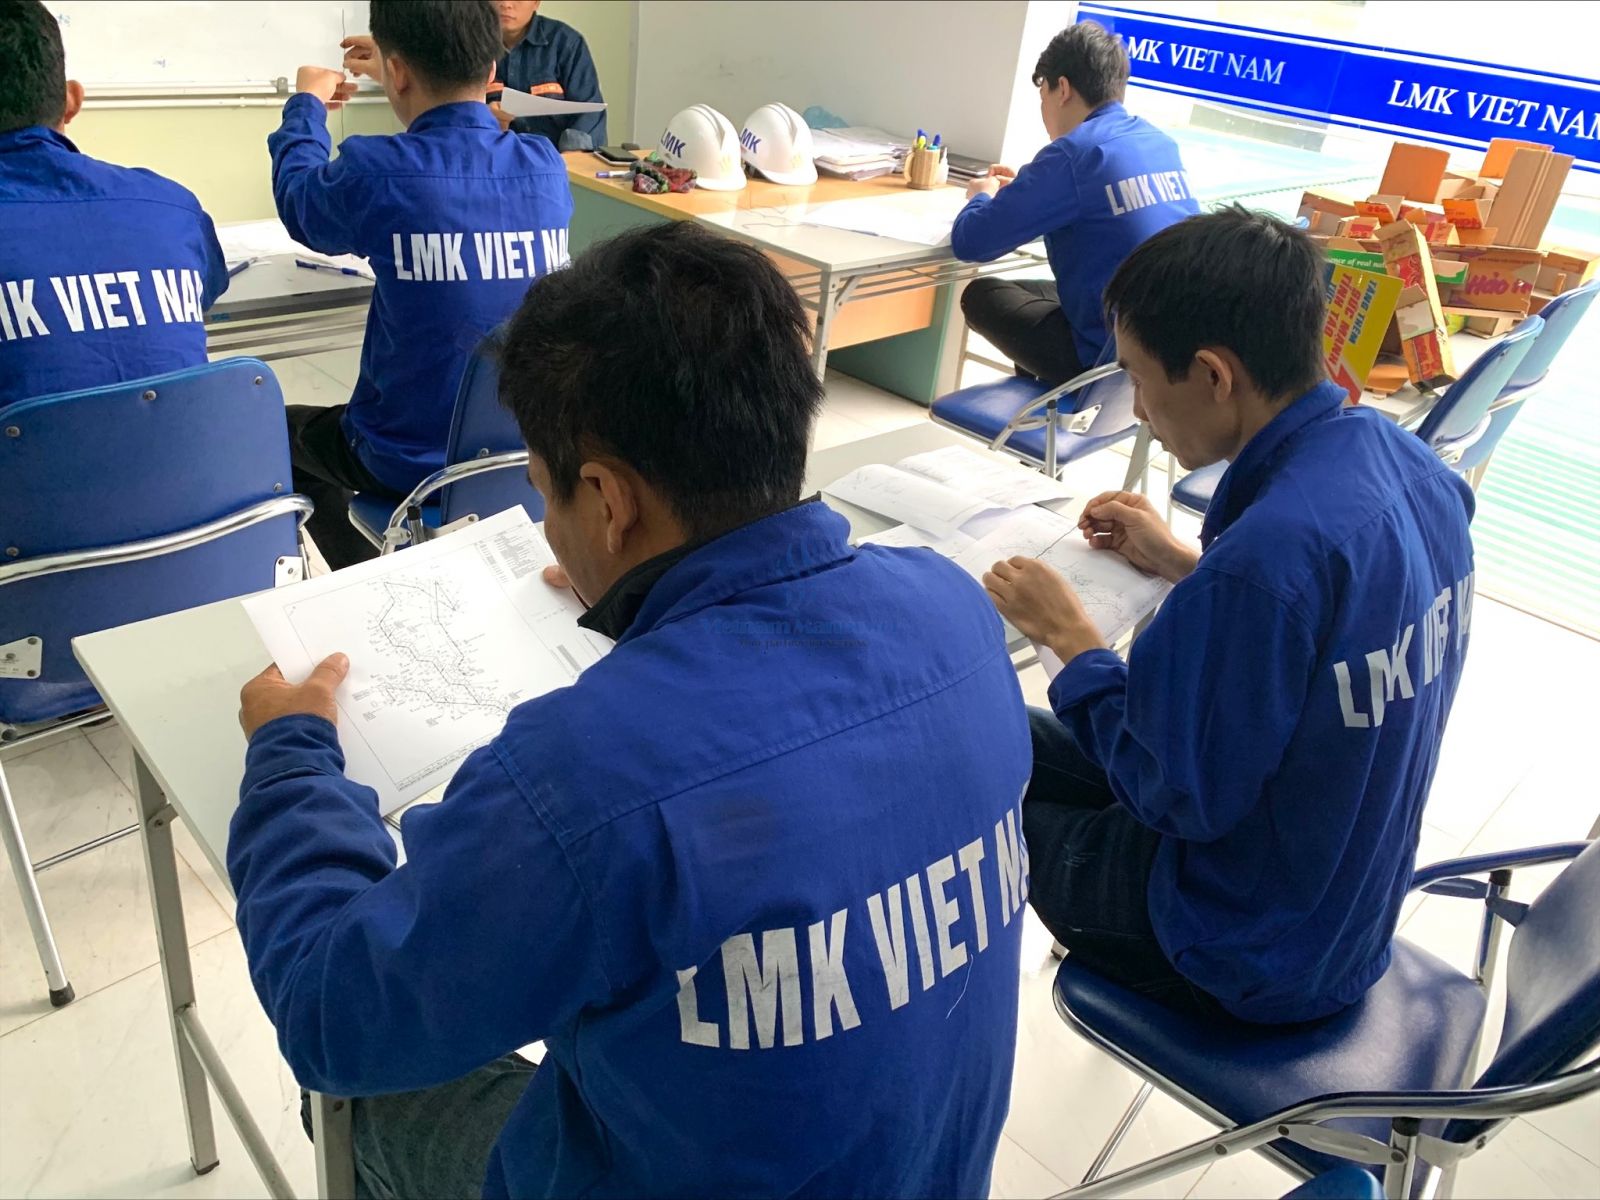 What constitutes the quality of the workforce being prepared to supply to Sinopec partner?